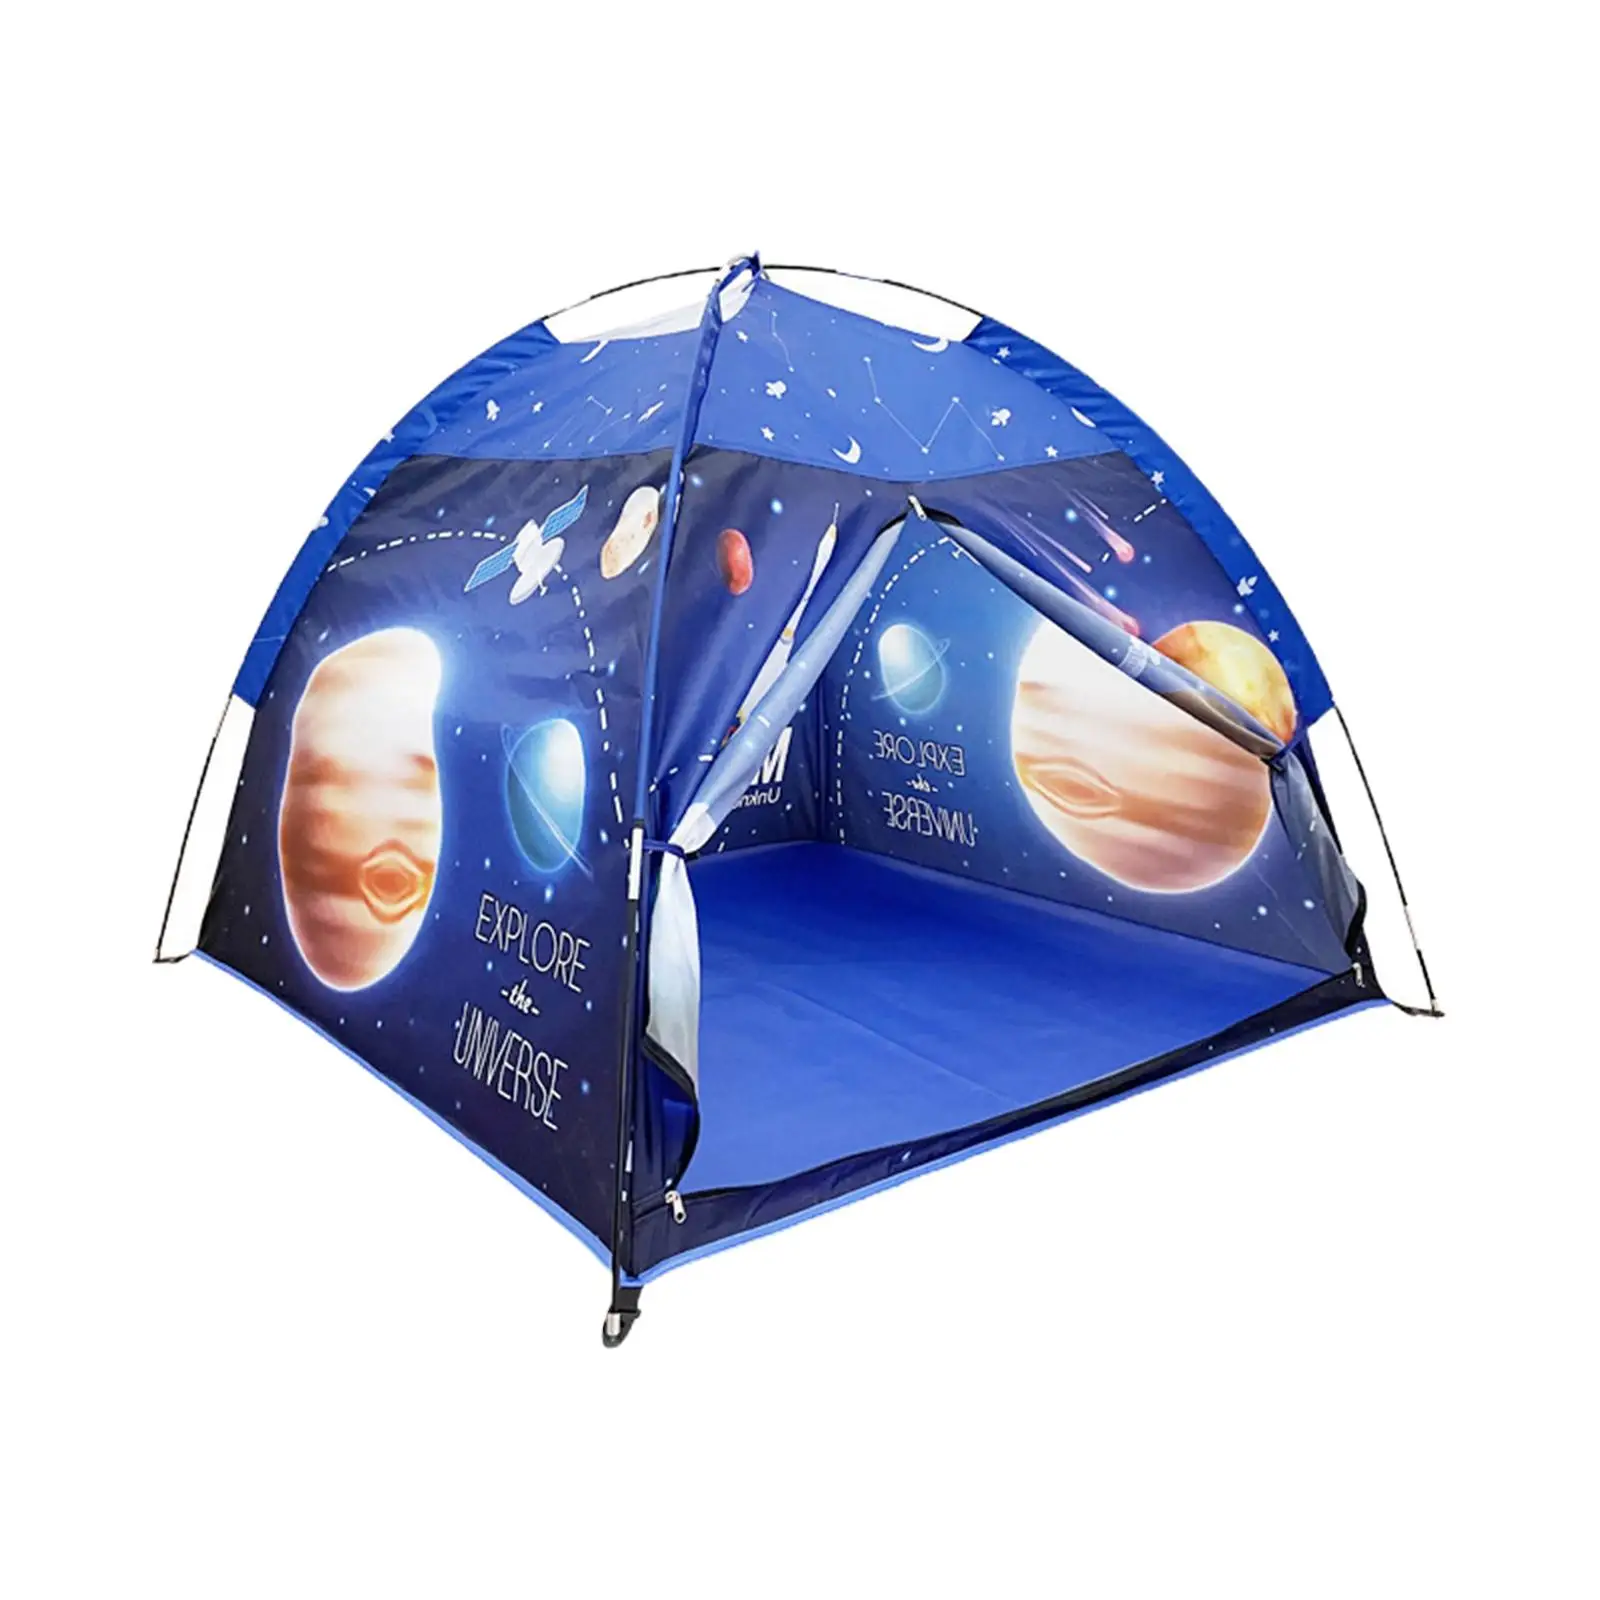 Indoor and Outdoor Play Tent Camping Toy Child Room Decor Kids Tent Baby Play House for Boys Girls Children Kids Birhtday Gifts